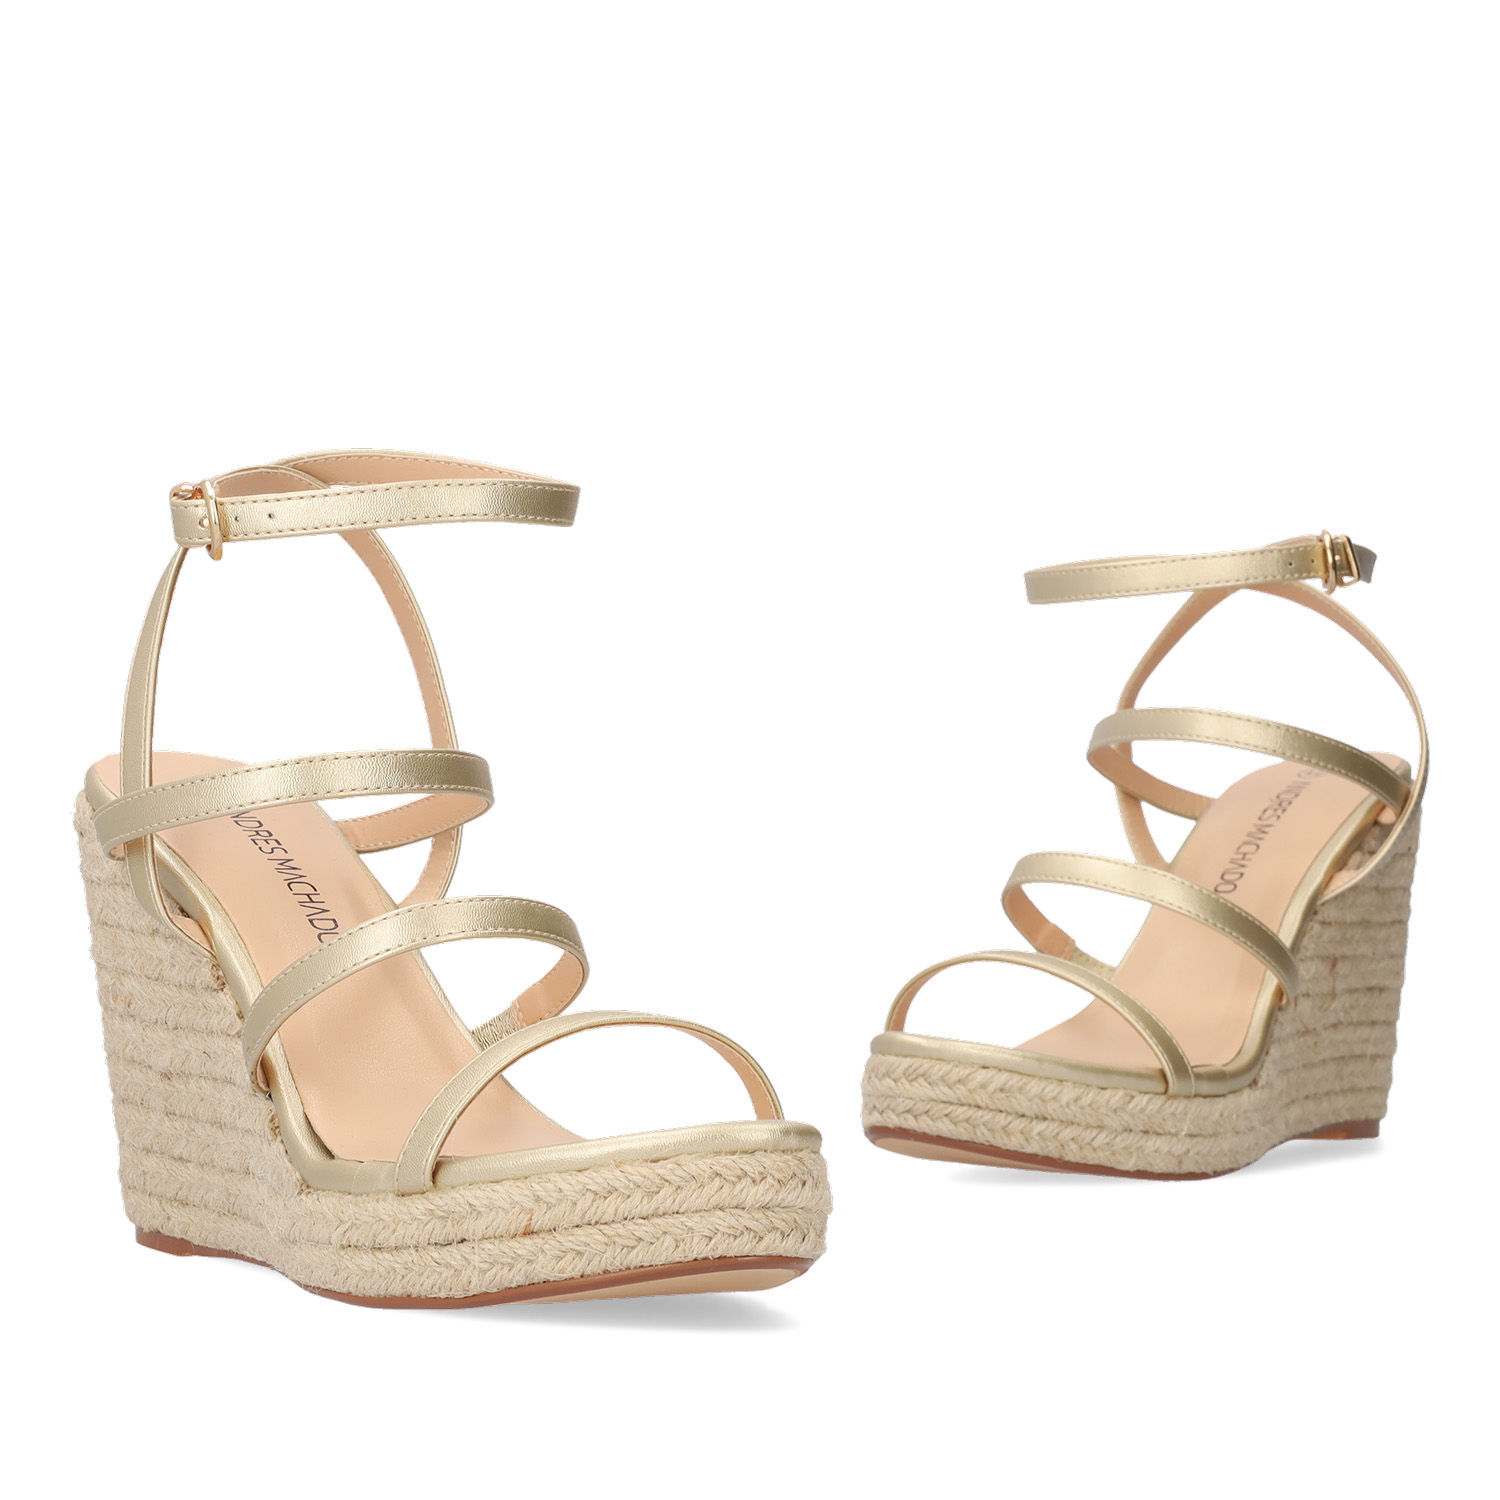 Golden soft fabric sandal with a jute wedge 